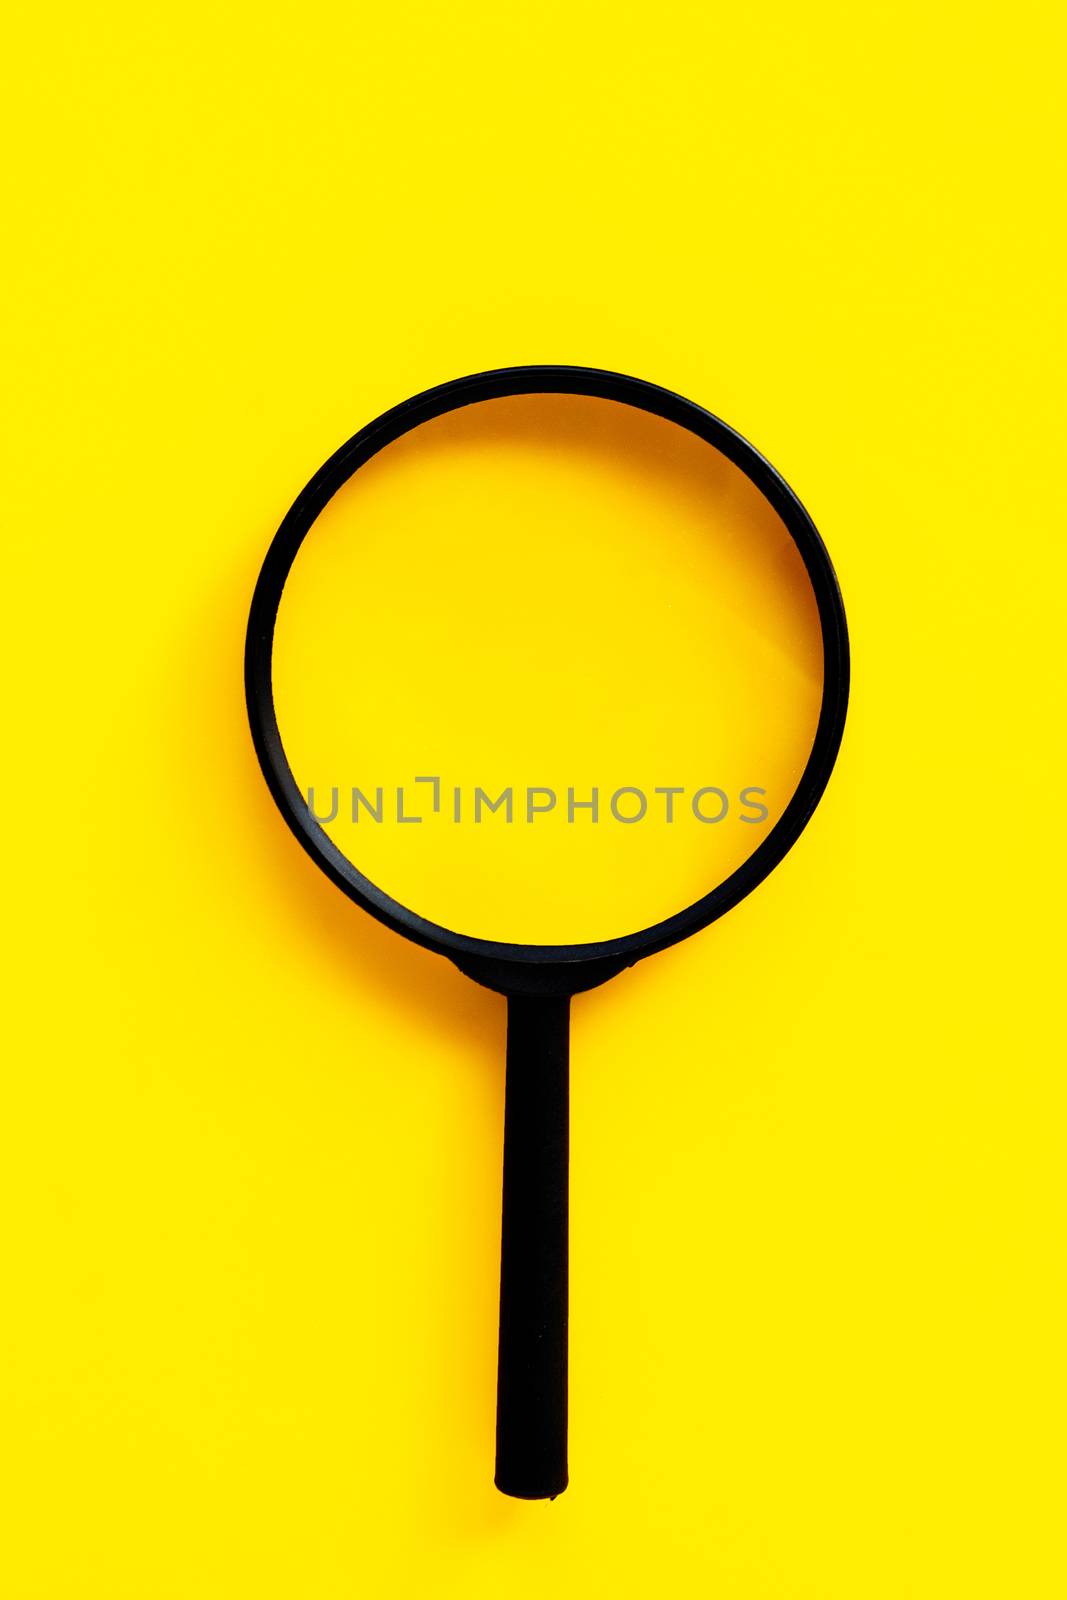 Magnifying glass on yello background. by Bowonpat